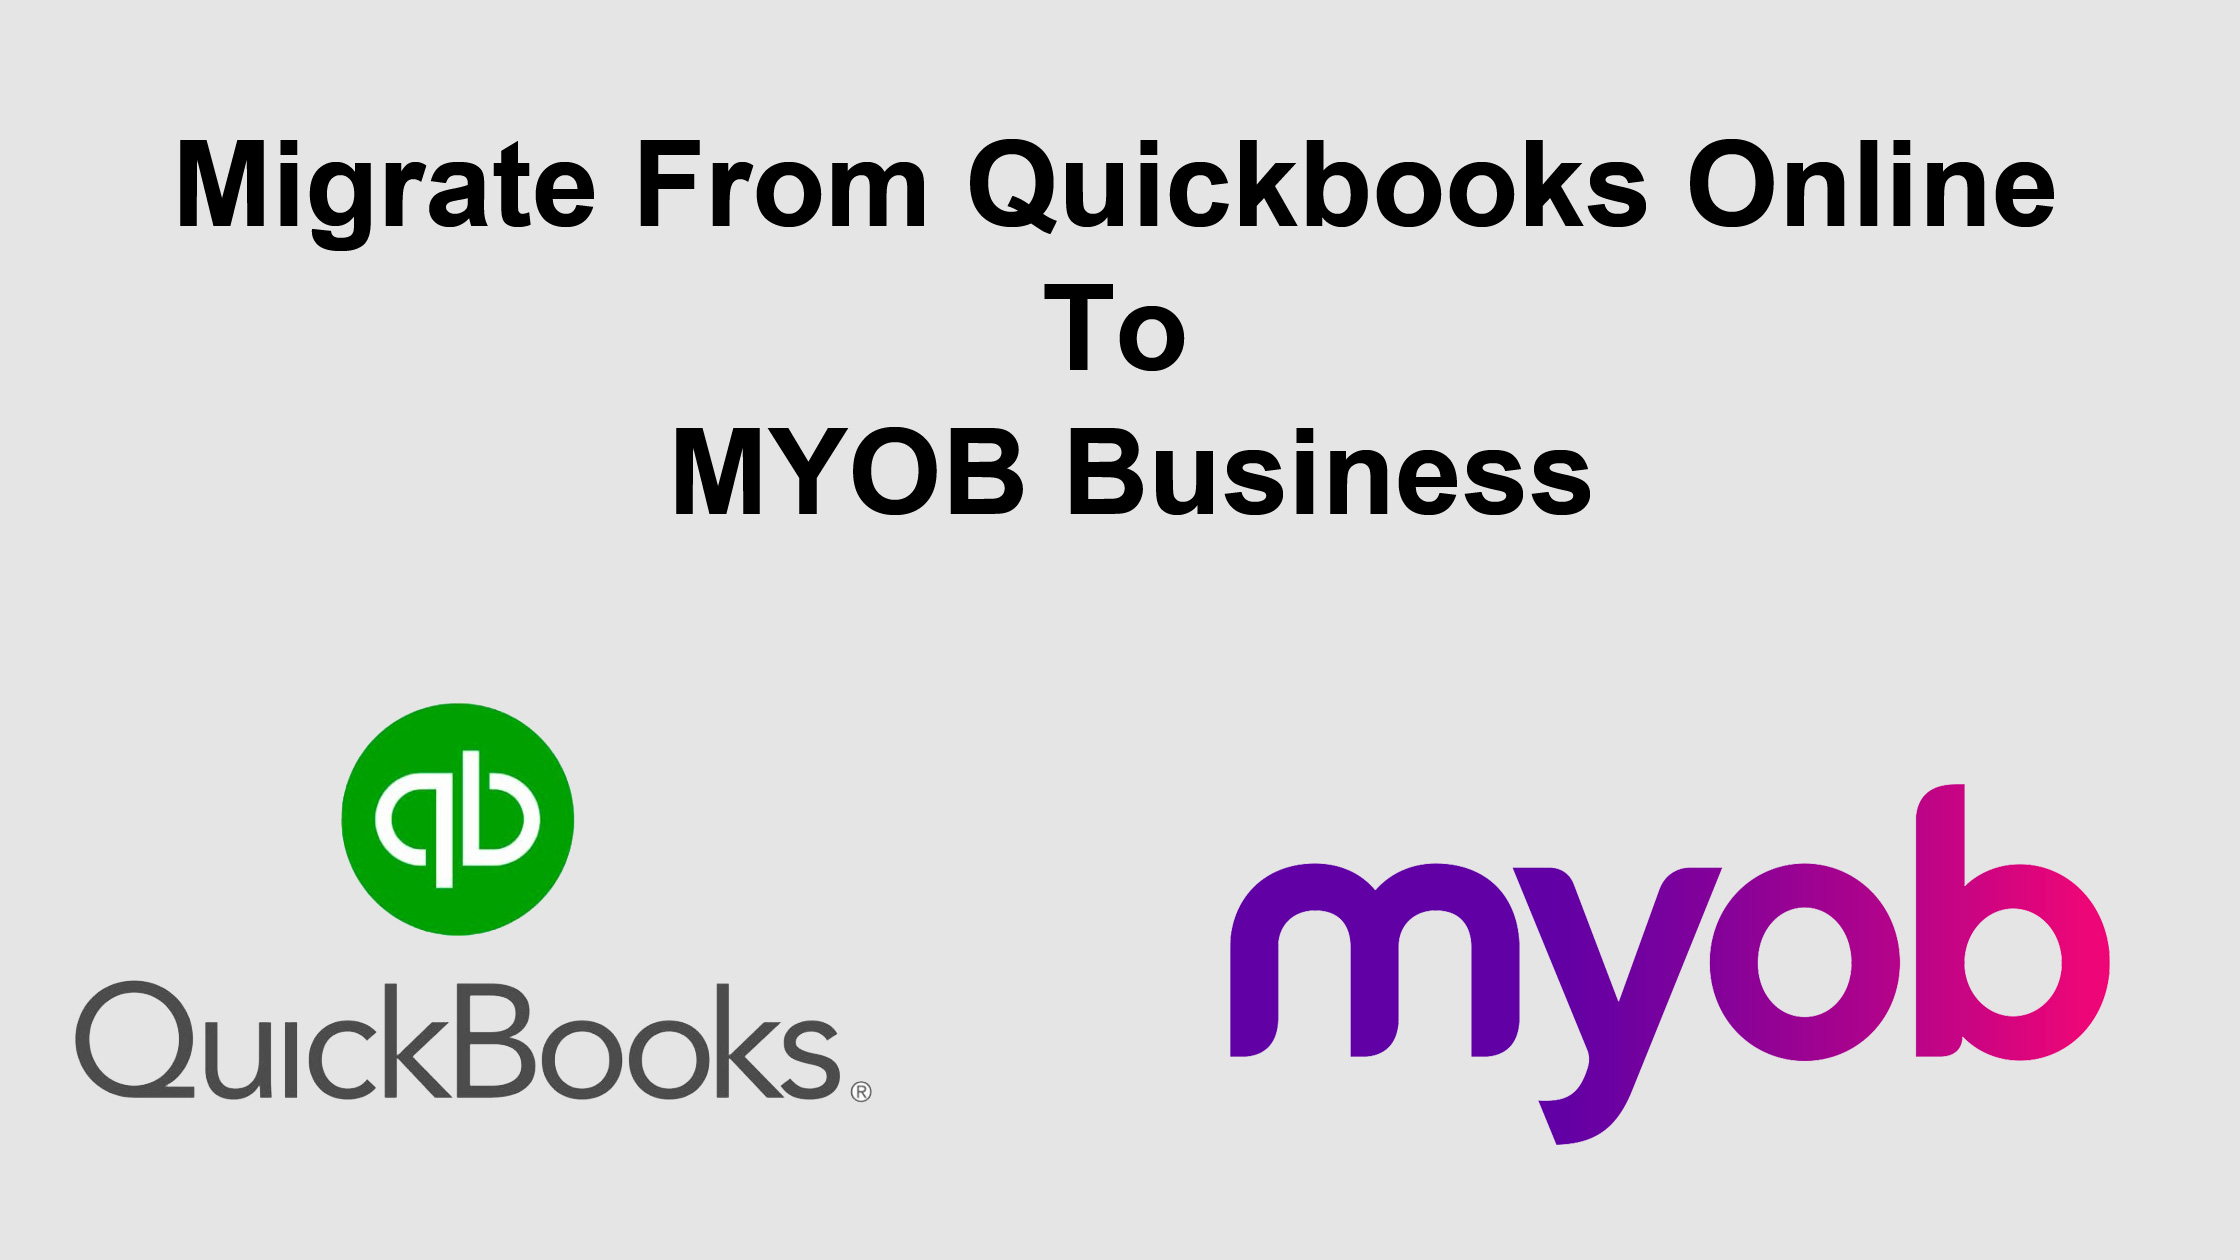 Migrate from QuickBooks Online to MYOB Business